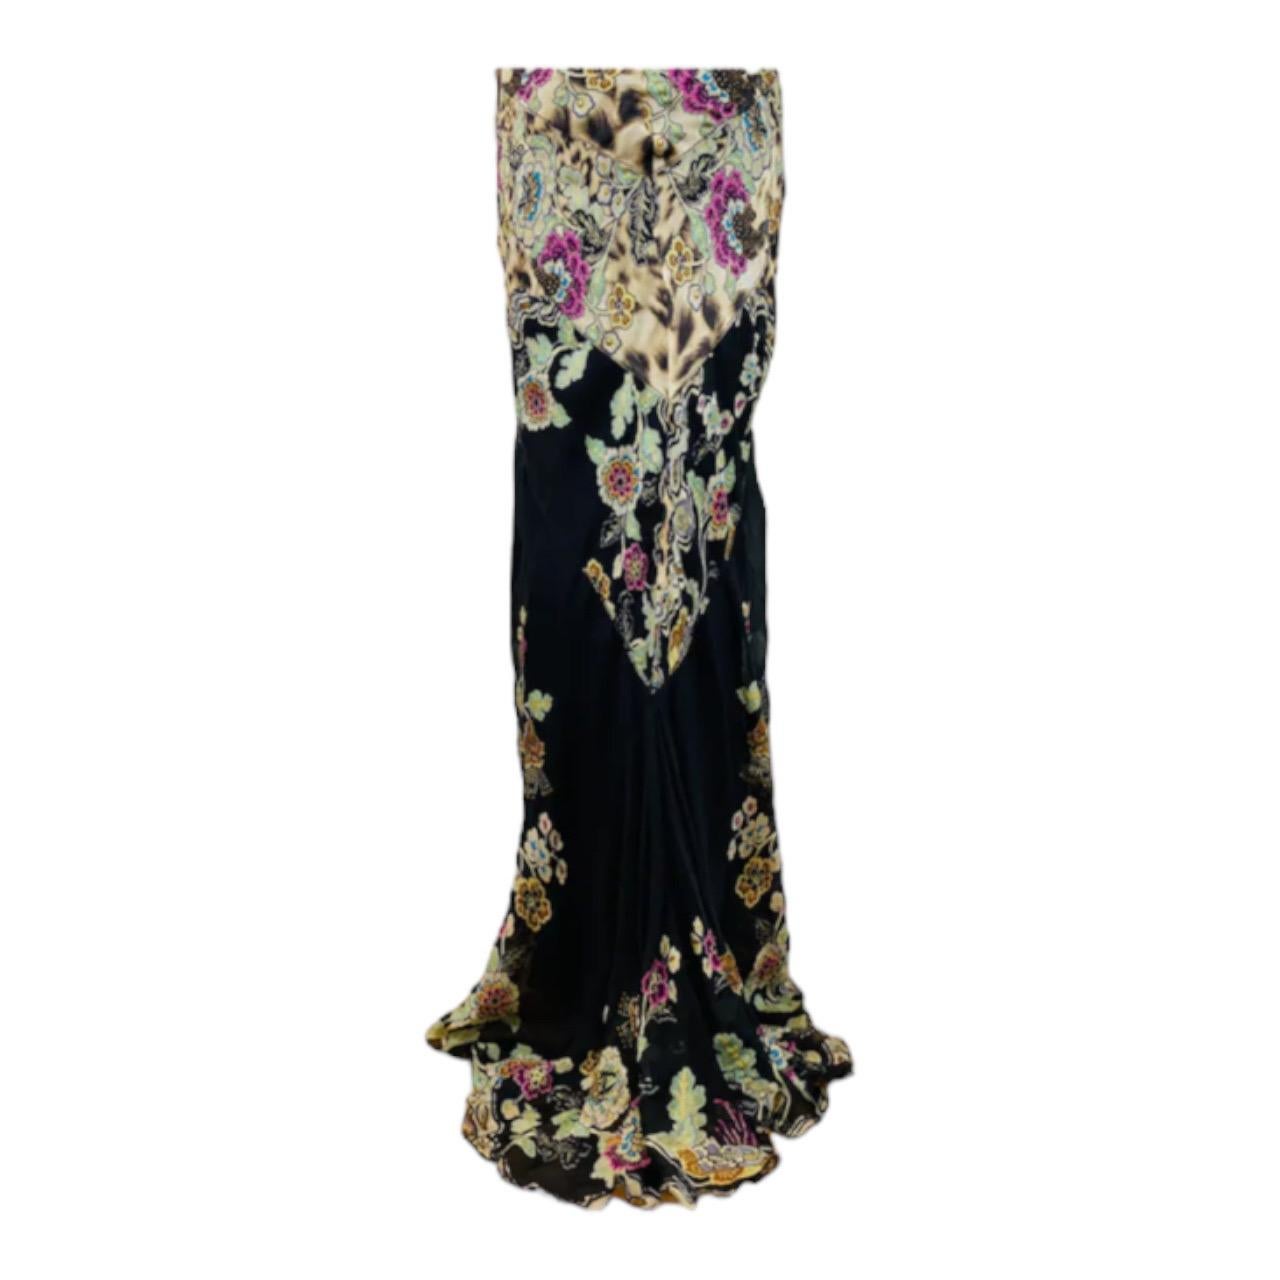 Vintage S/S 2003 Roberto Cavalli Black Chinoiserie Leopard Floral Dress Gown For Sale 4